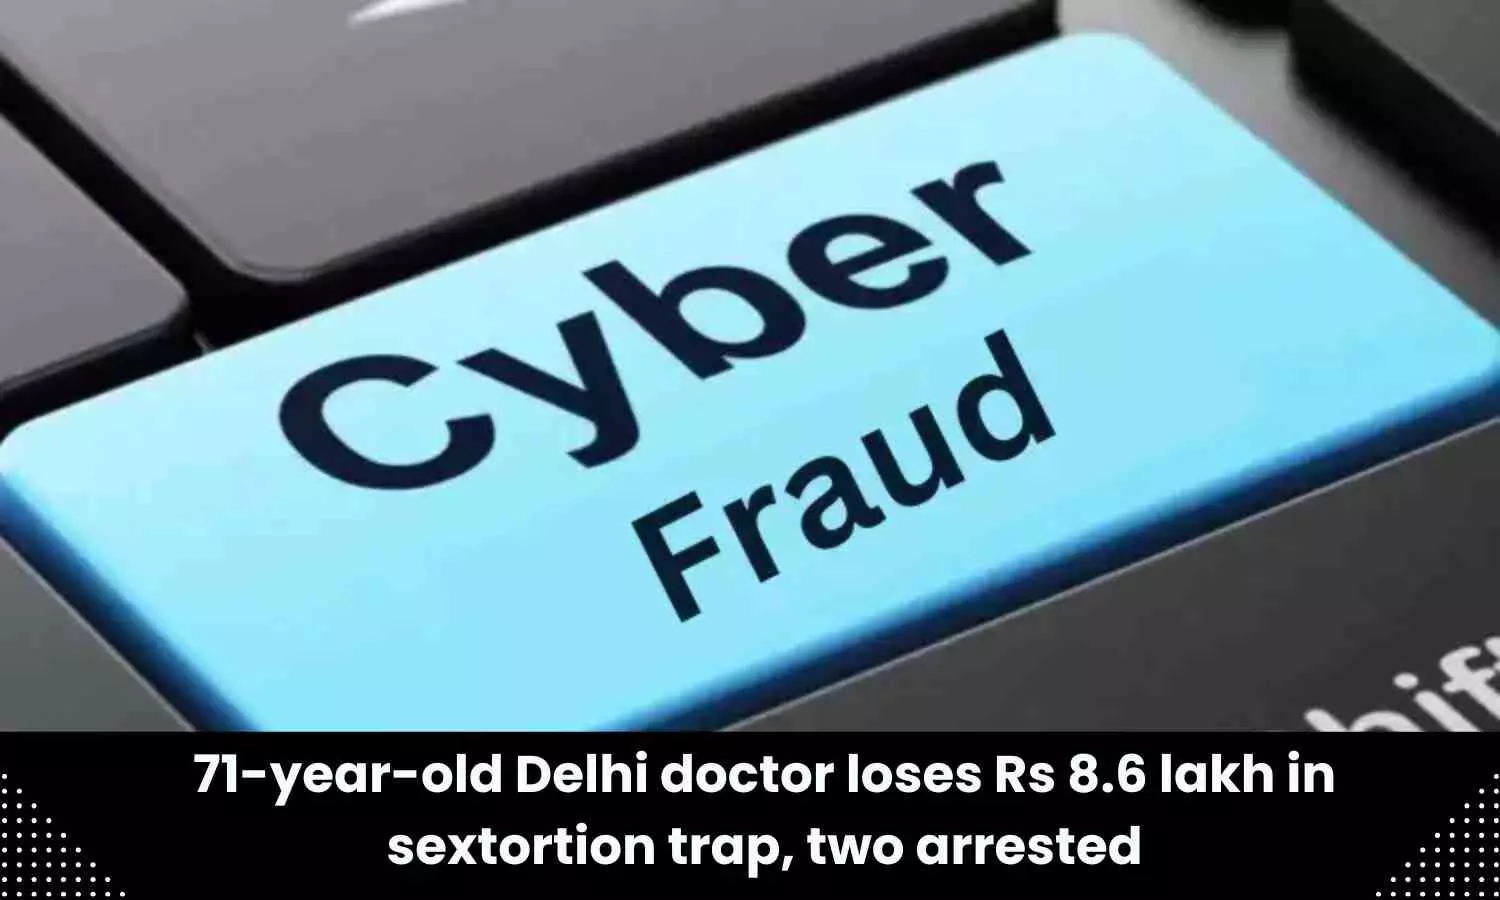 Delhi doctor becomes victim of sextortion scam, loses Rs 8.6 Lakh